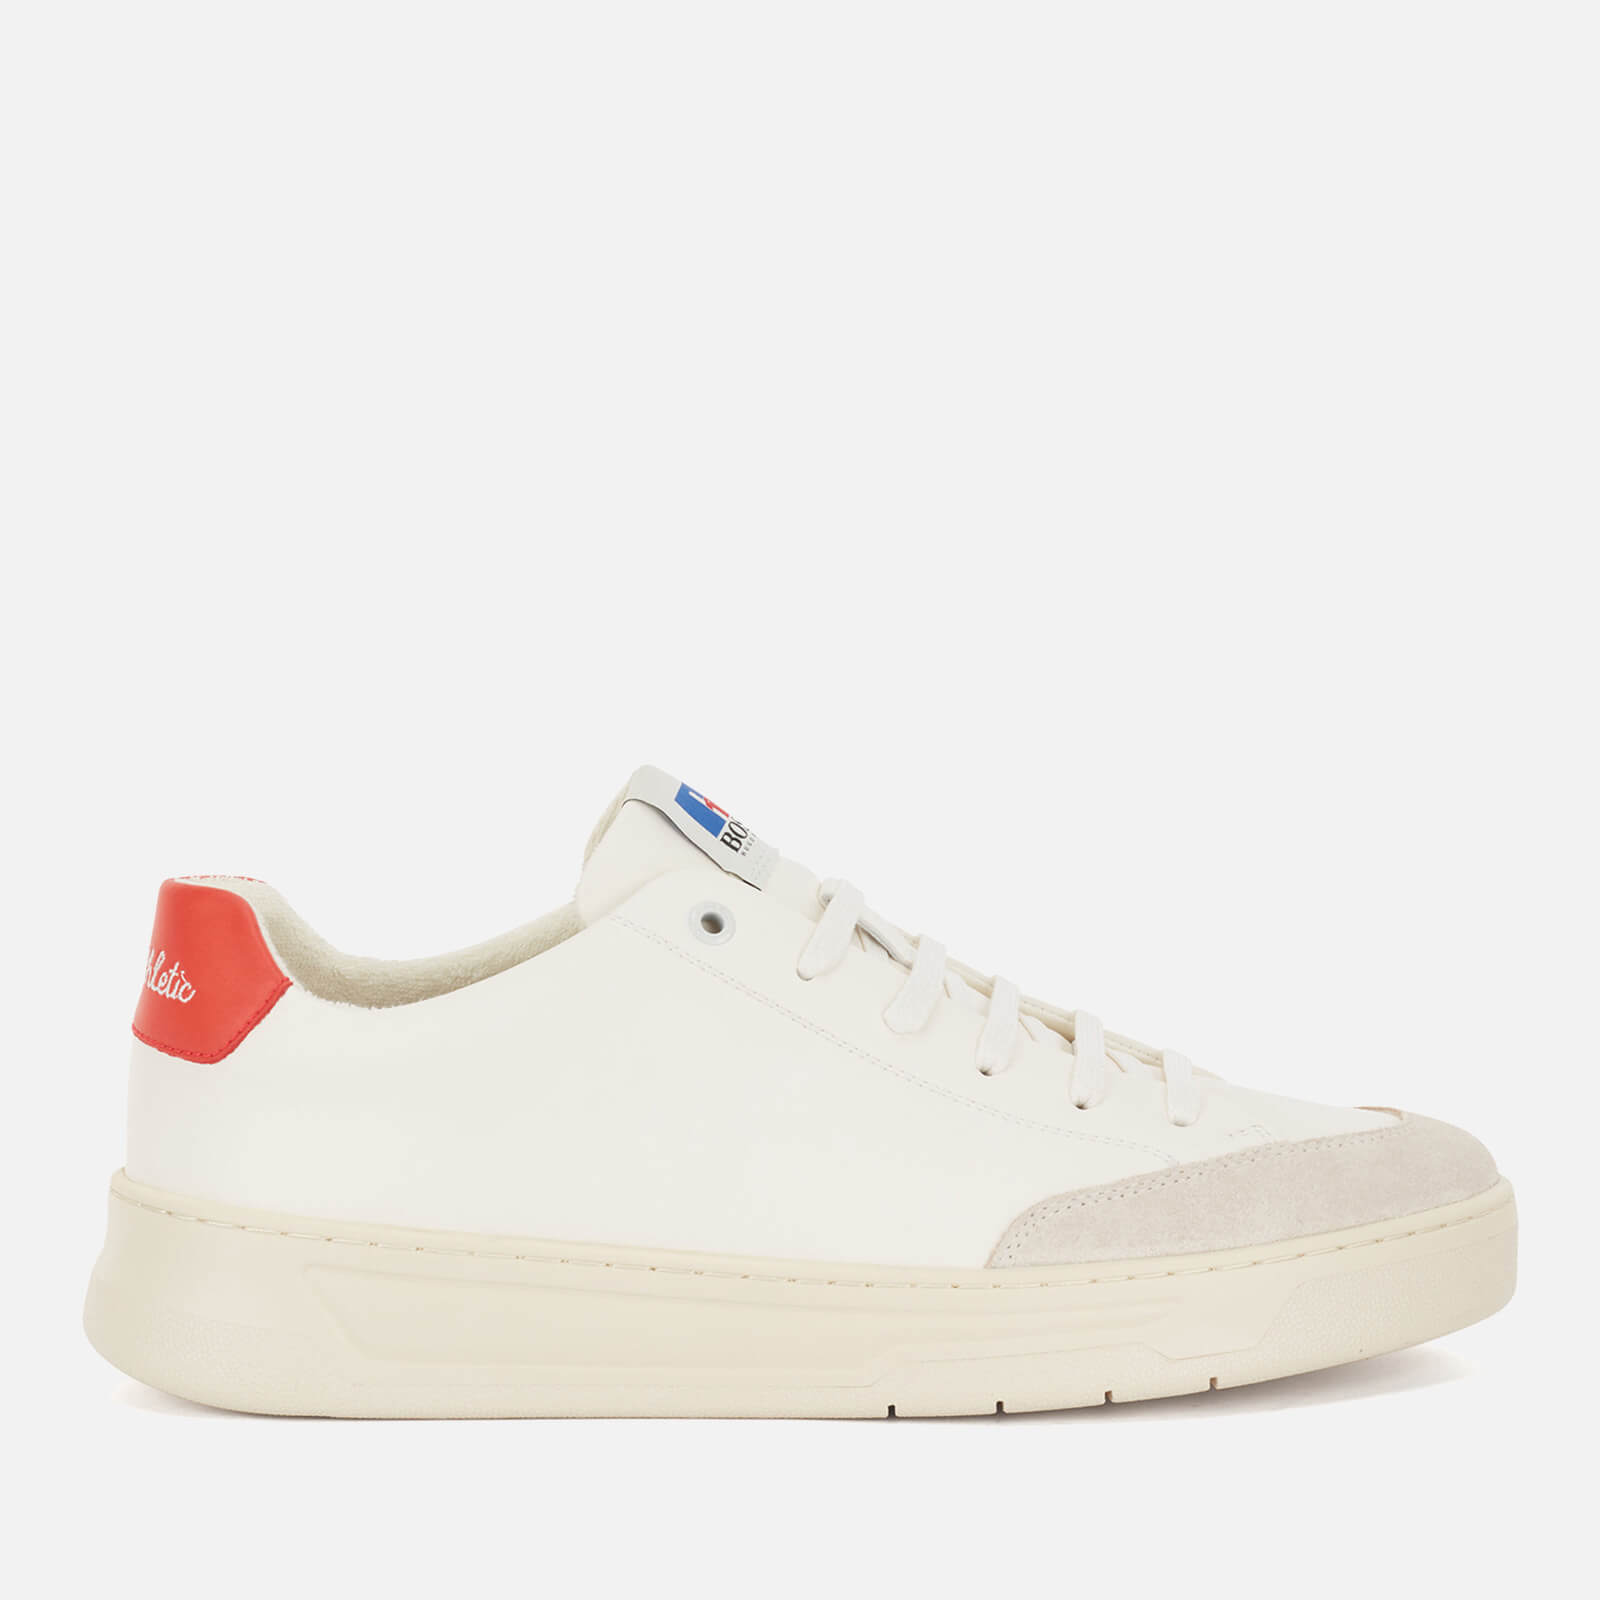 BOSS X Russell Athletic Men's Baltimore Tennis 01 Trainers - Open White - UK 8